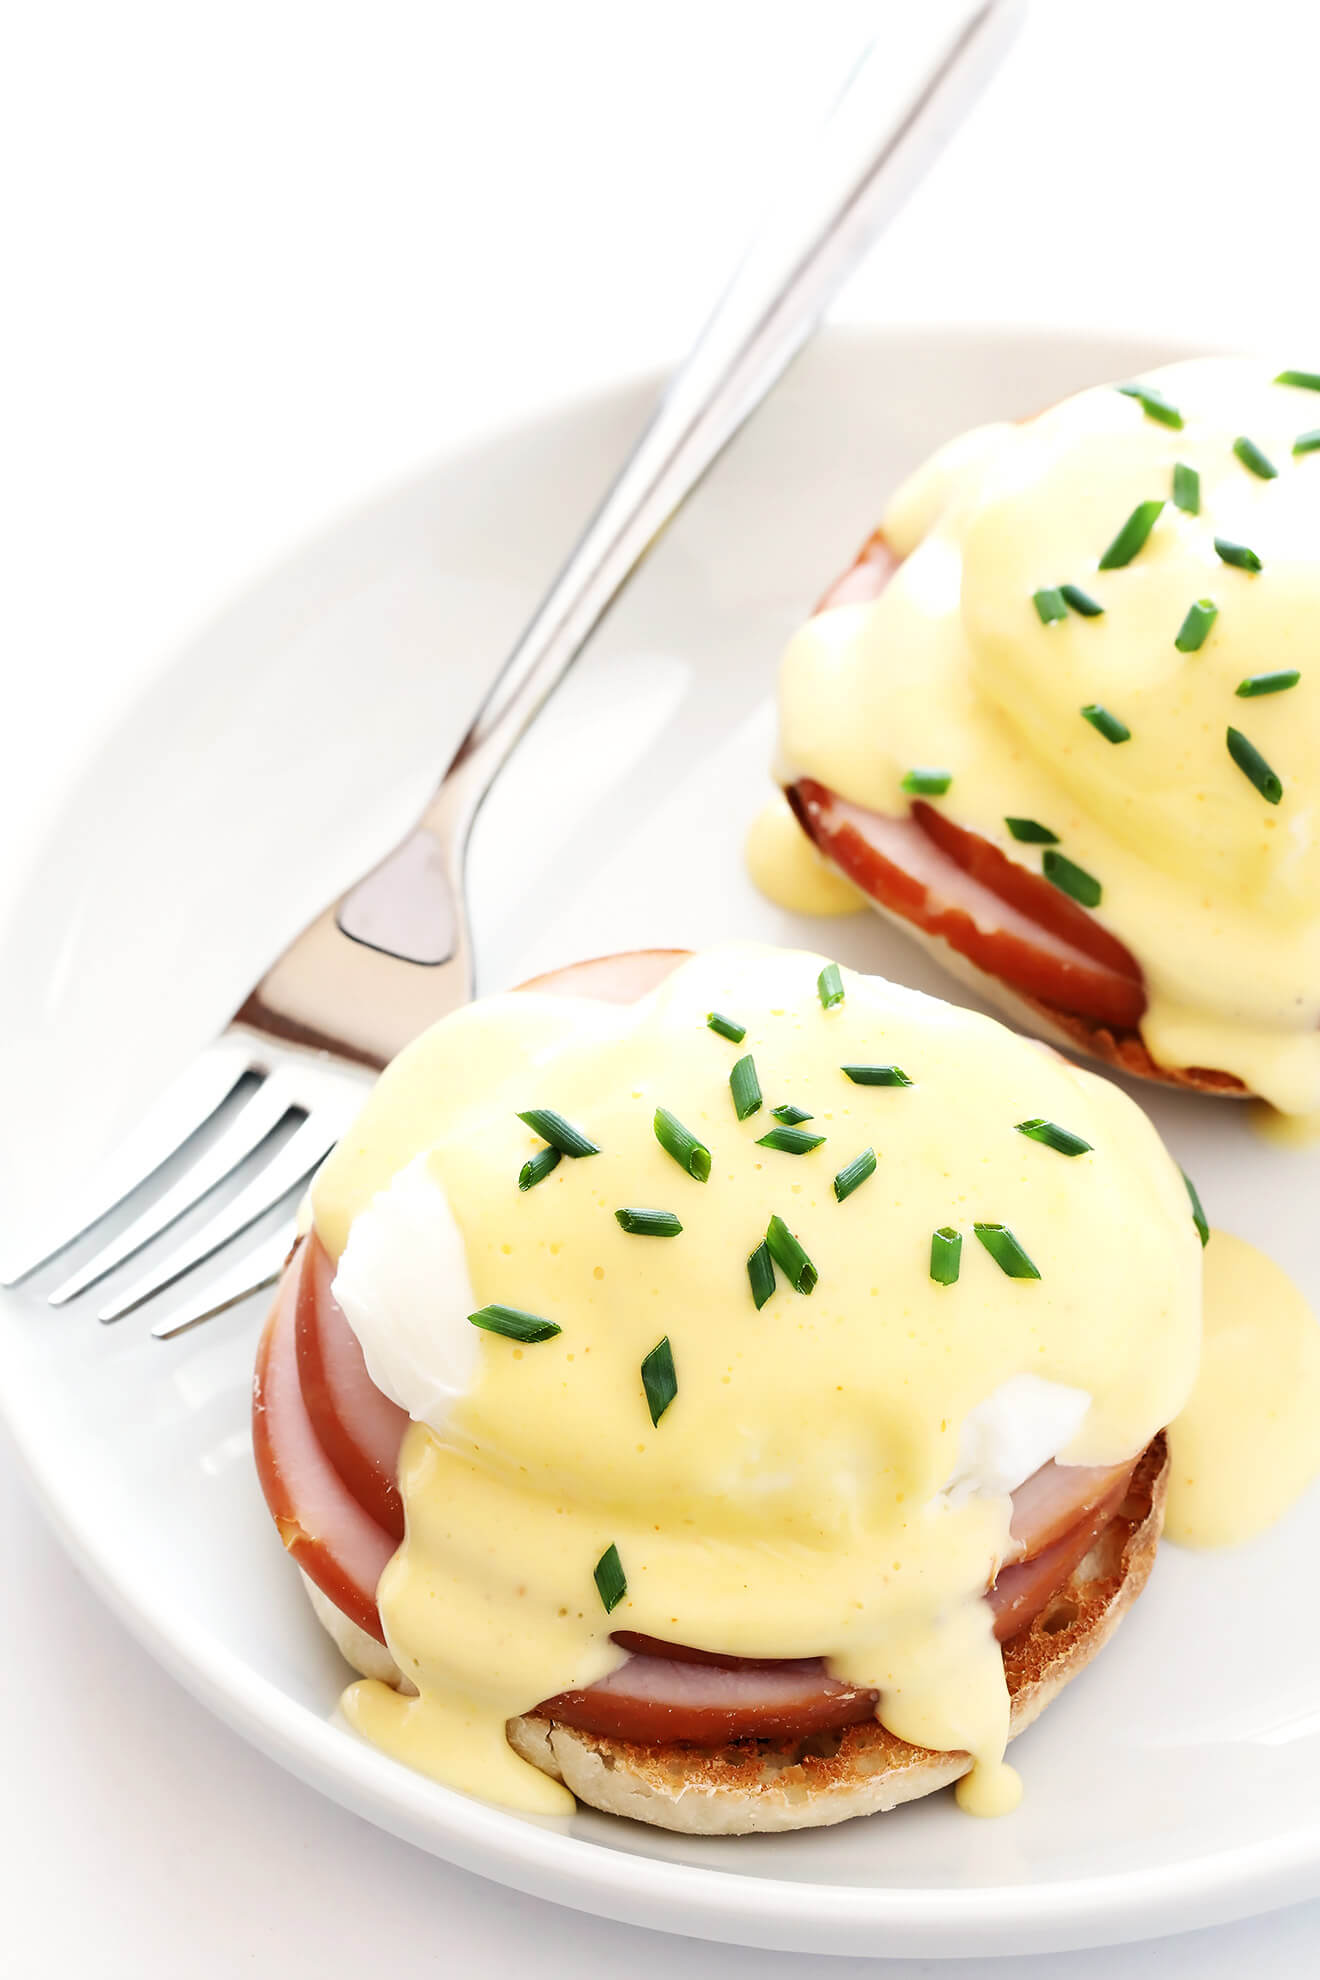 This is my favorite recipe for classic Eggs Benedict. The blender Hollandaise sauce is surprisingly easy to make, and so tasty! | gimmesomeoven.com